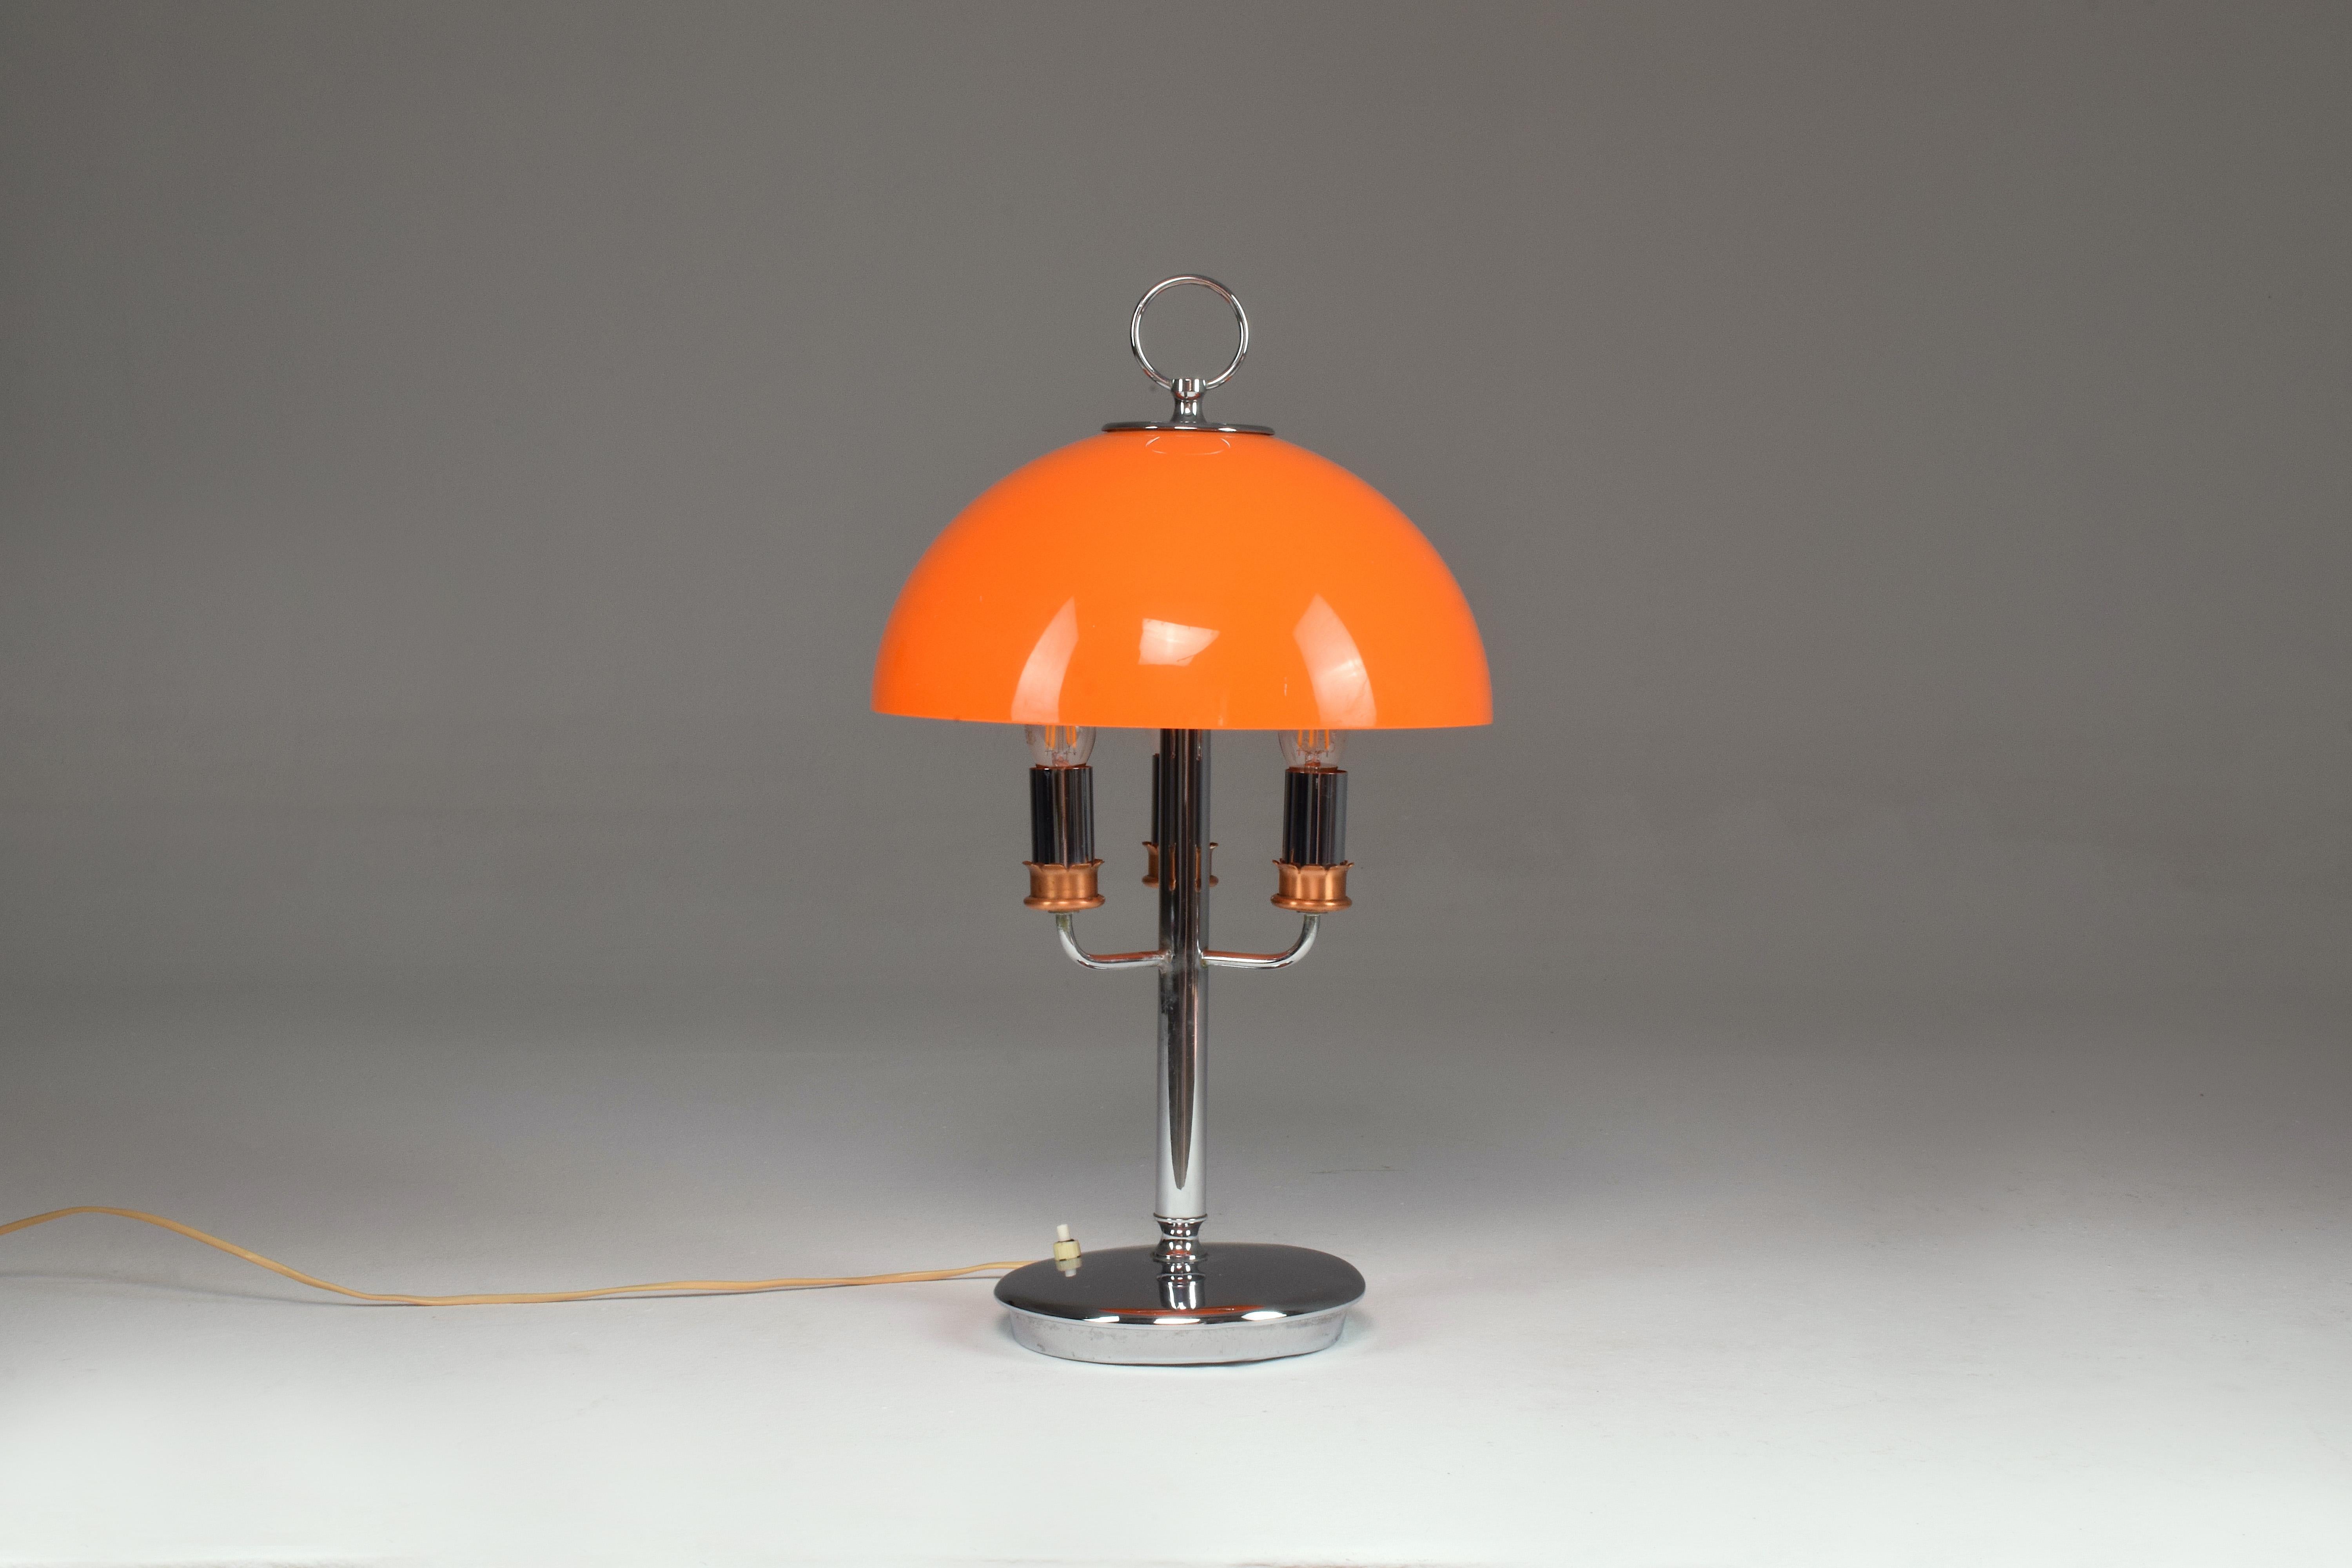 A super stylish space age style 20th-century vintage Italian table lamp designed with an orange plexiglass shade, a metal carrier handle at the top, and three-light source inputs. 
The structure is in chrome brass and is teamed with a push-type